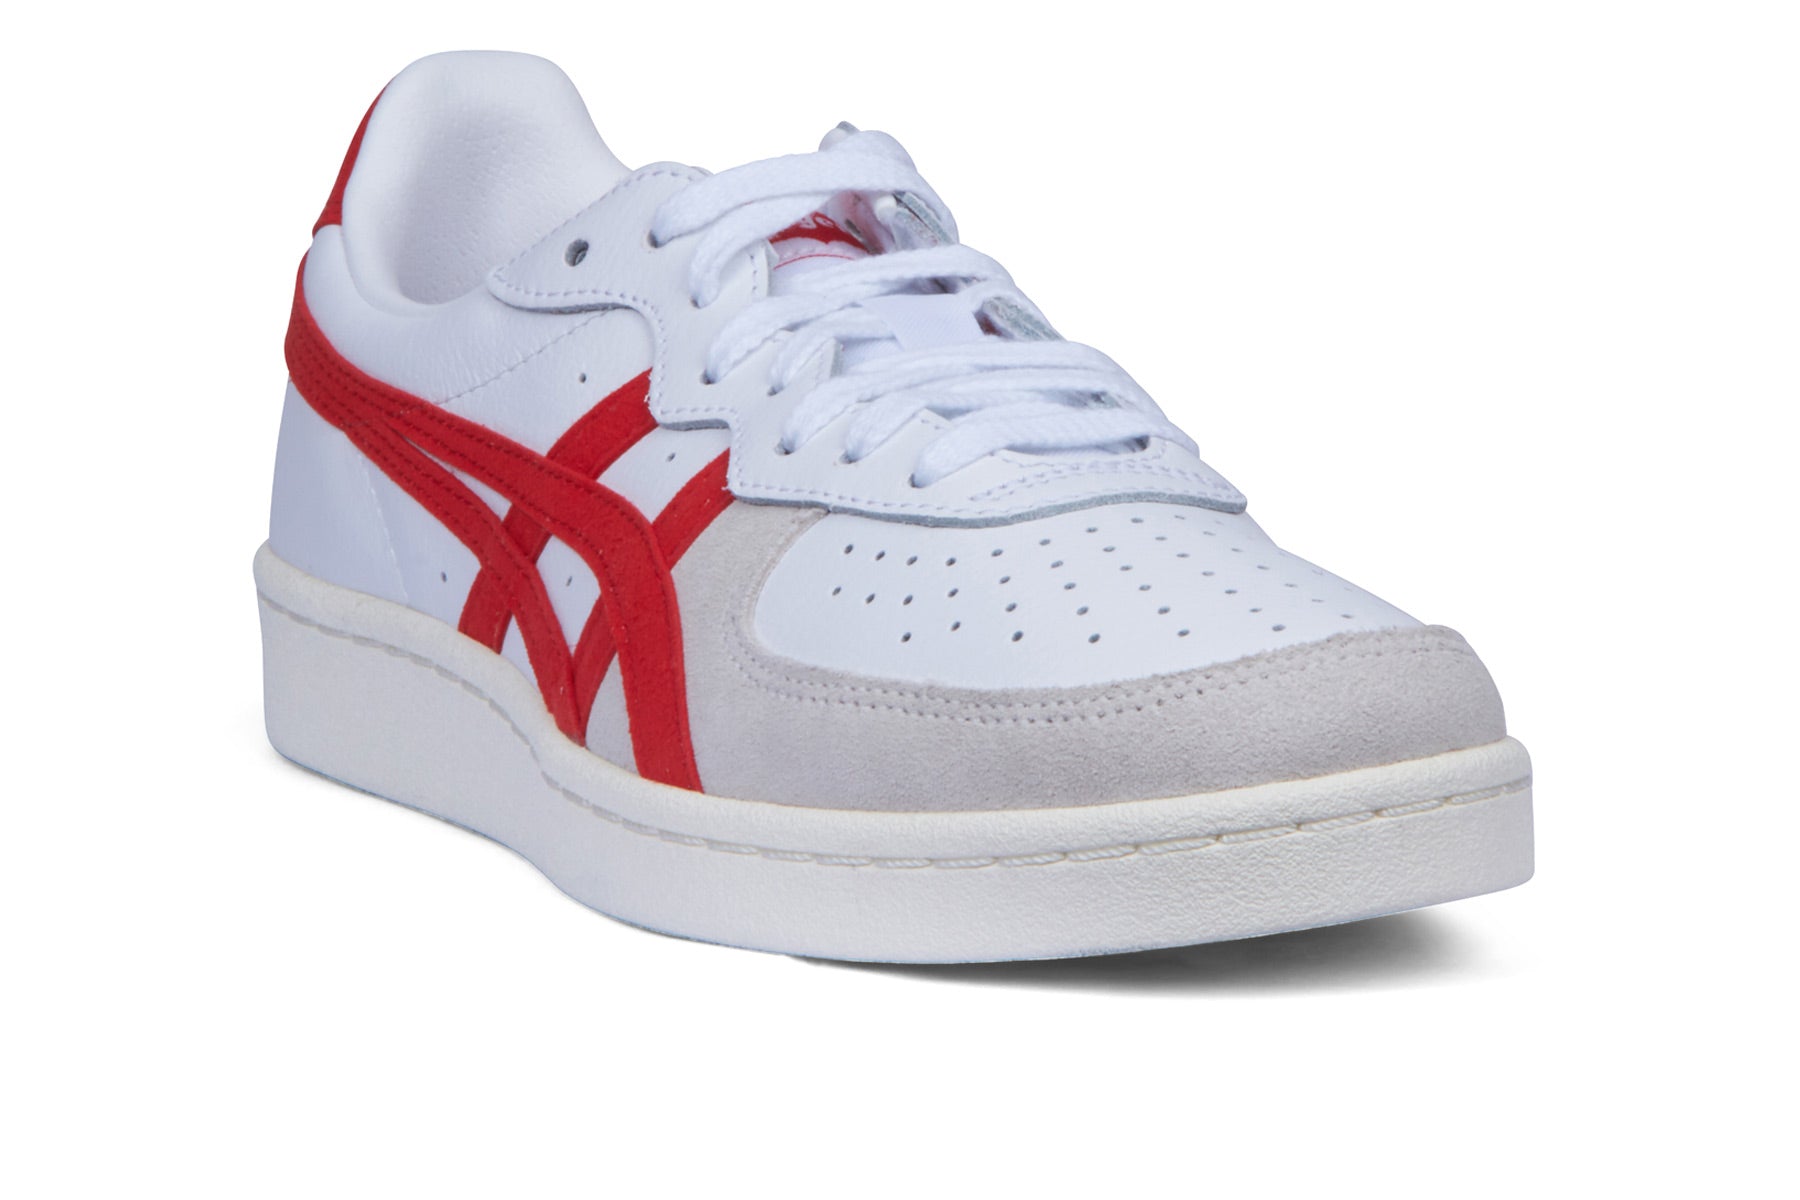 Onitsuka Tiger GSM - White / Classic Red